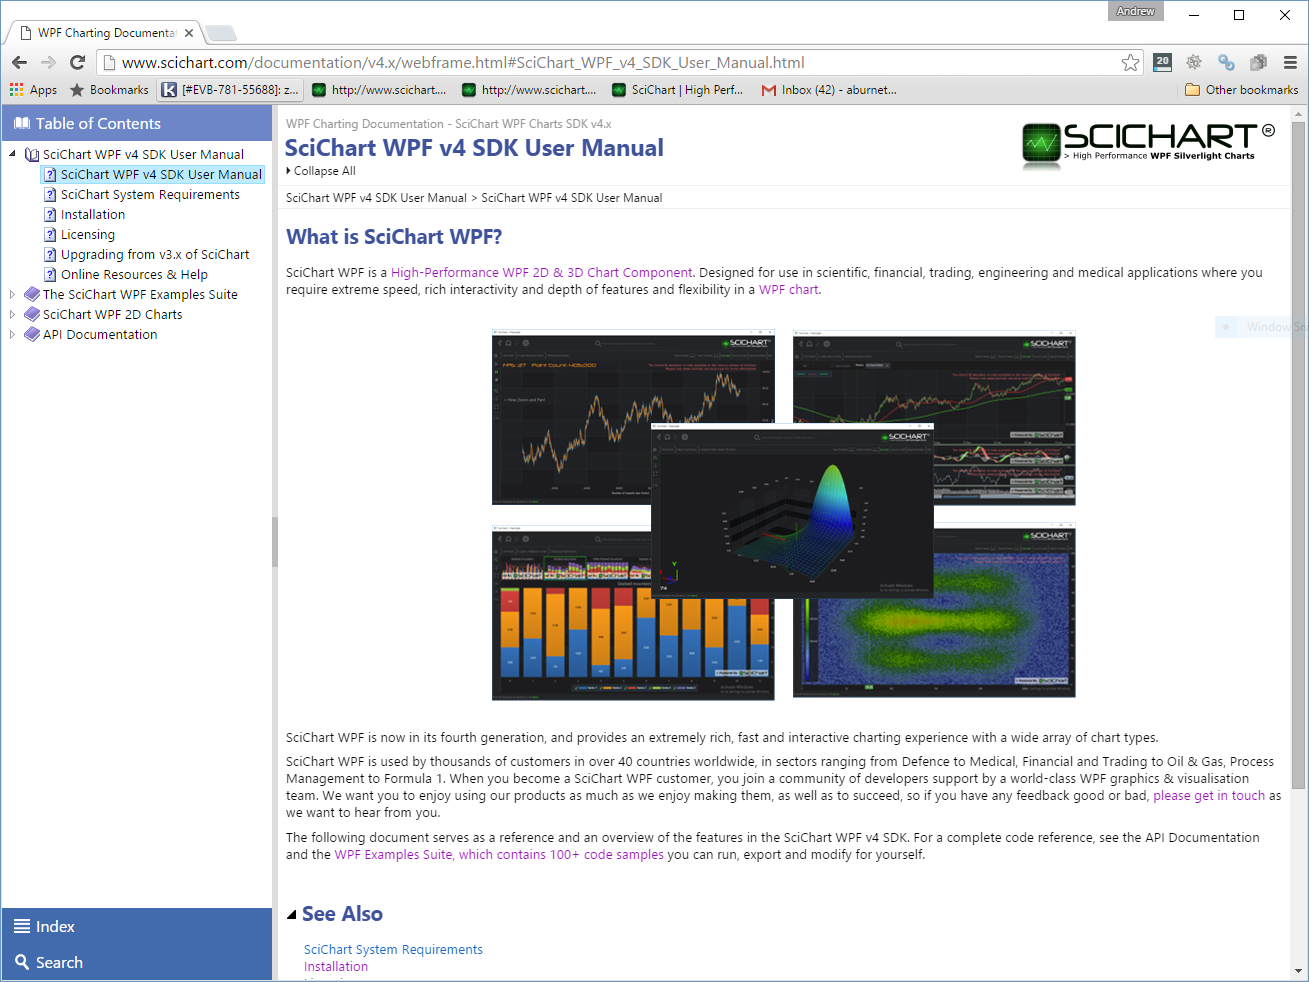 125 WPF Chart Examples and SciChart WPF SDK Documentation now live